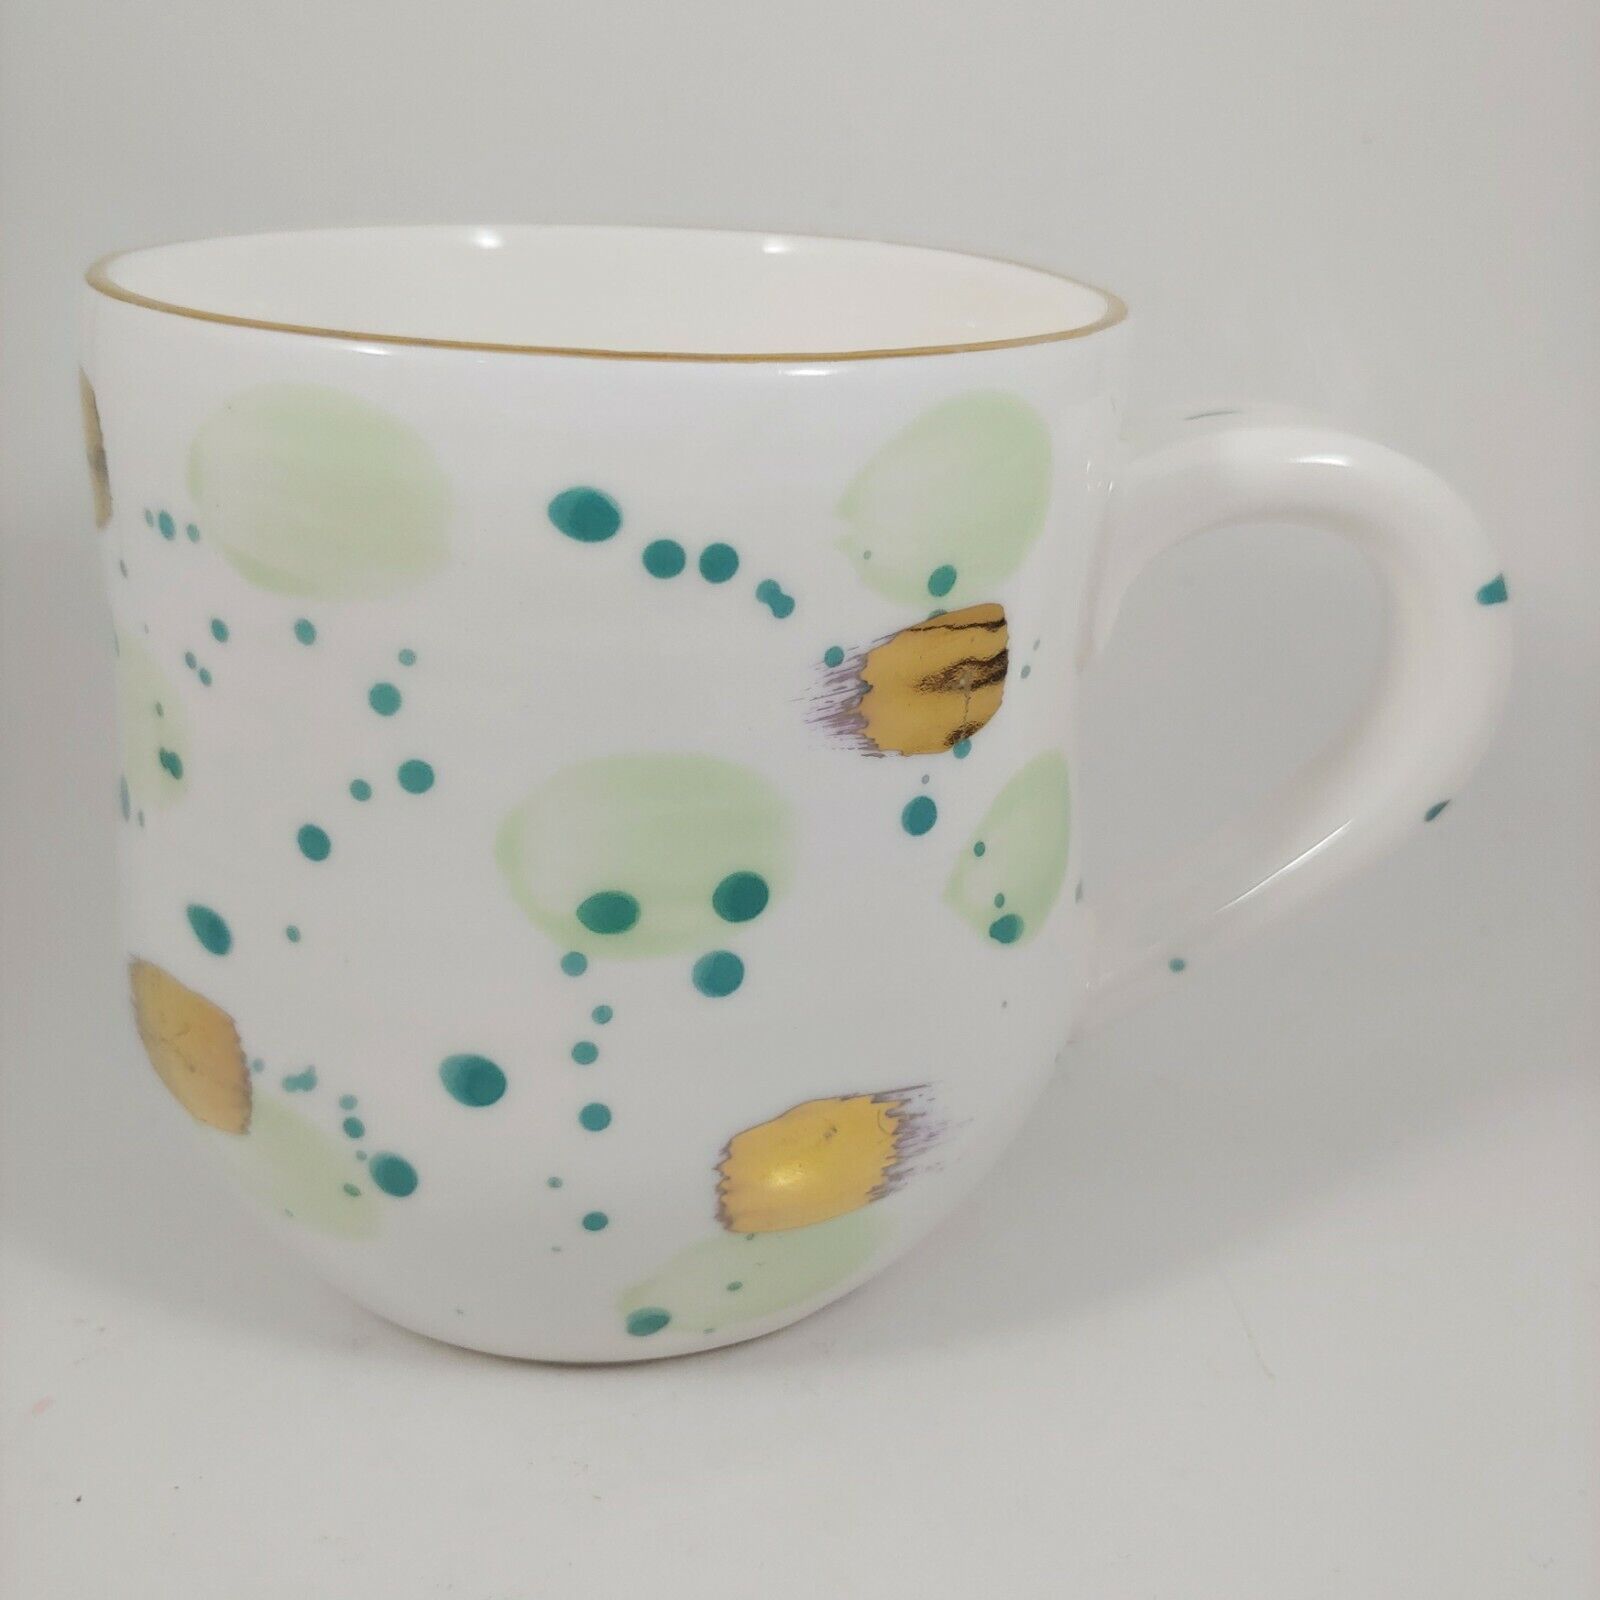 ANTHROPOLOGIE Coffee Mug / Cup - Green & Gold Dots Suite One Studio - 16oz Large